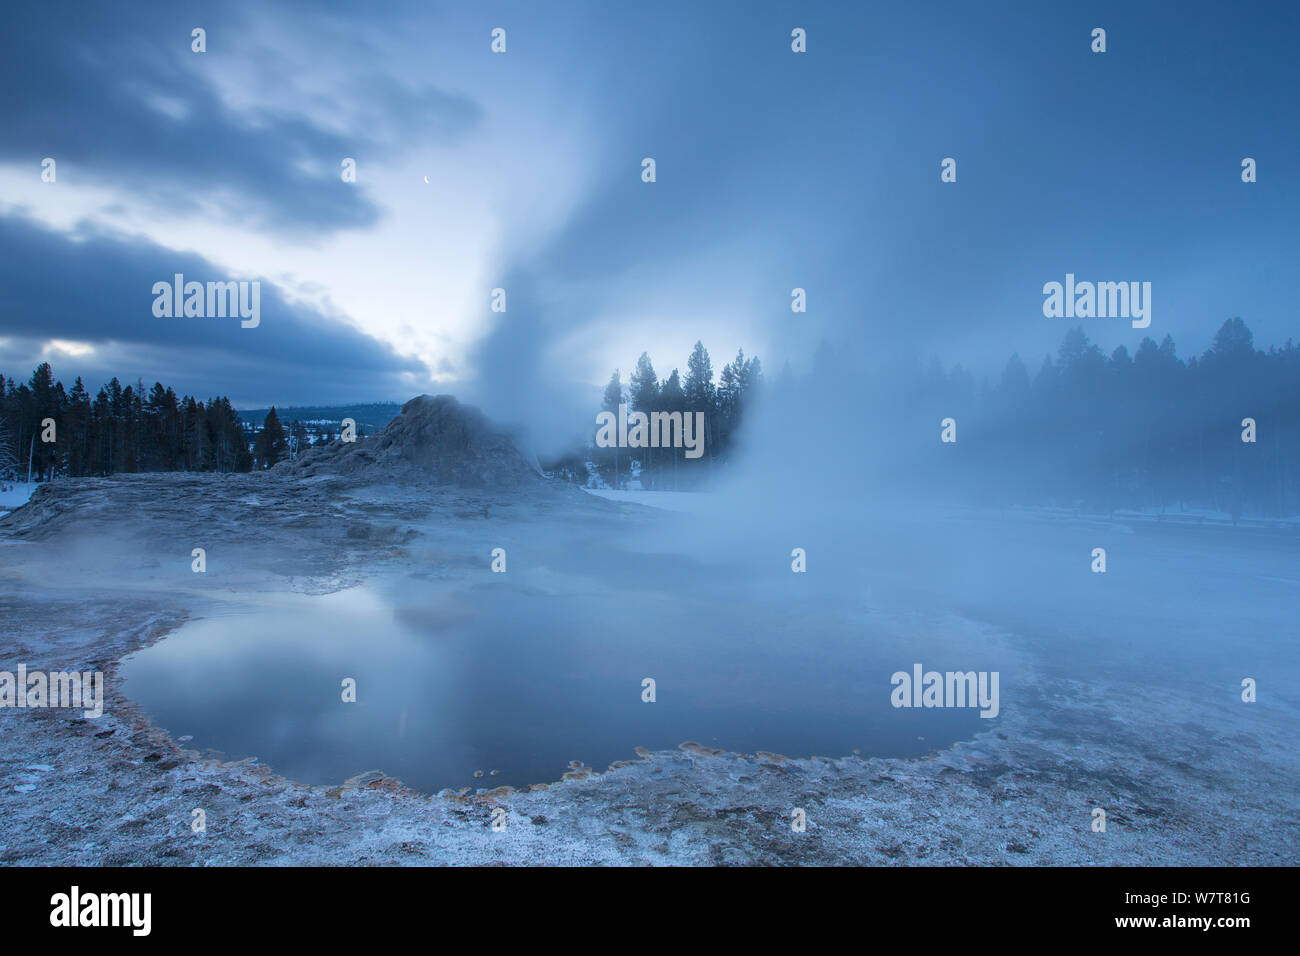 Castle Geyser at dawn, Yellowstone National Park, Wyoming, USA, February 2013., February. Stock Photo